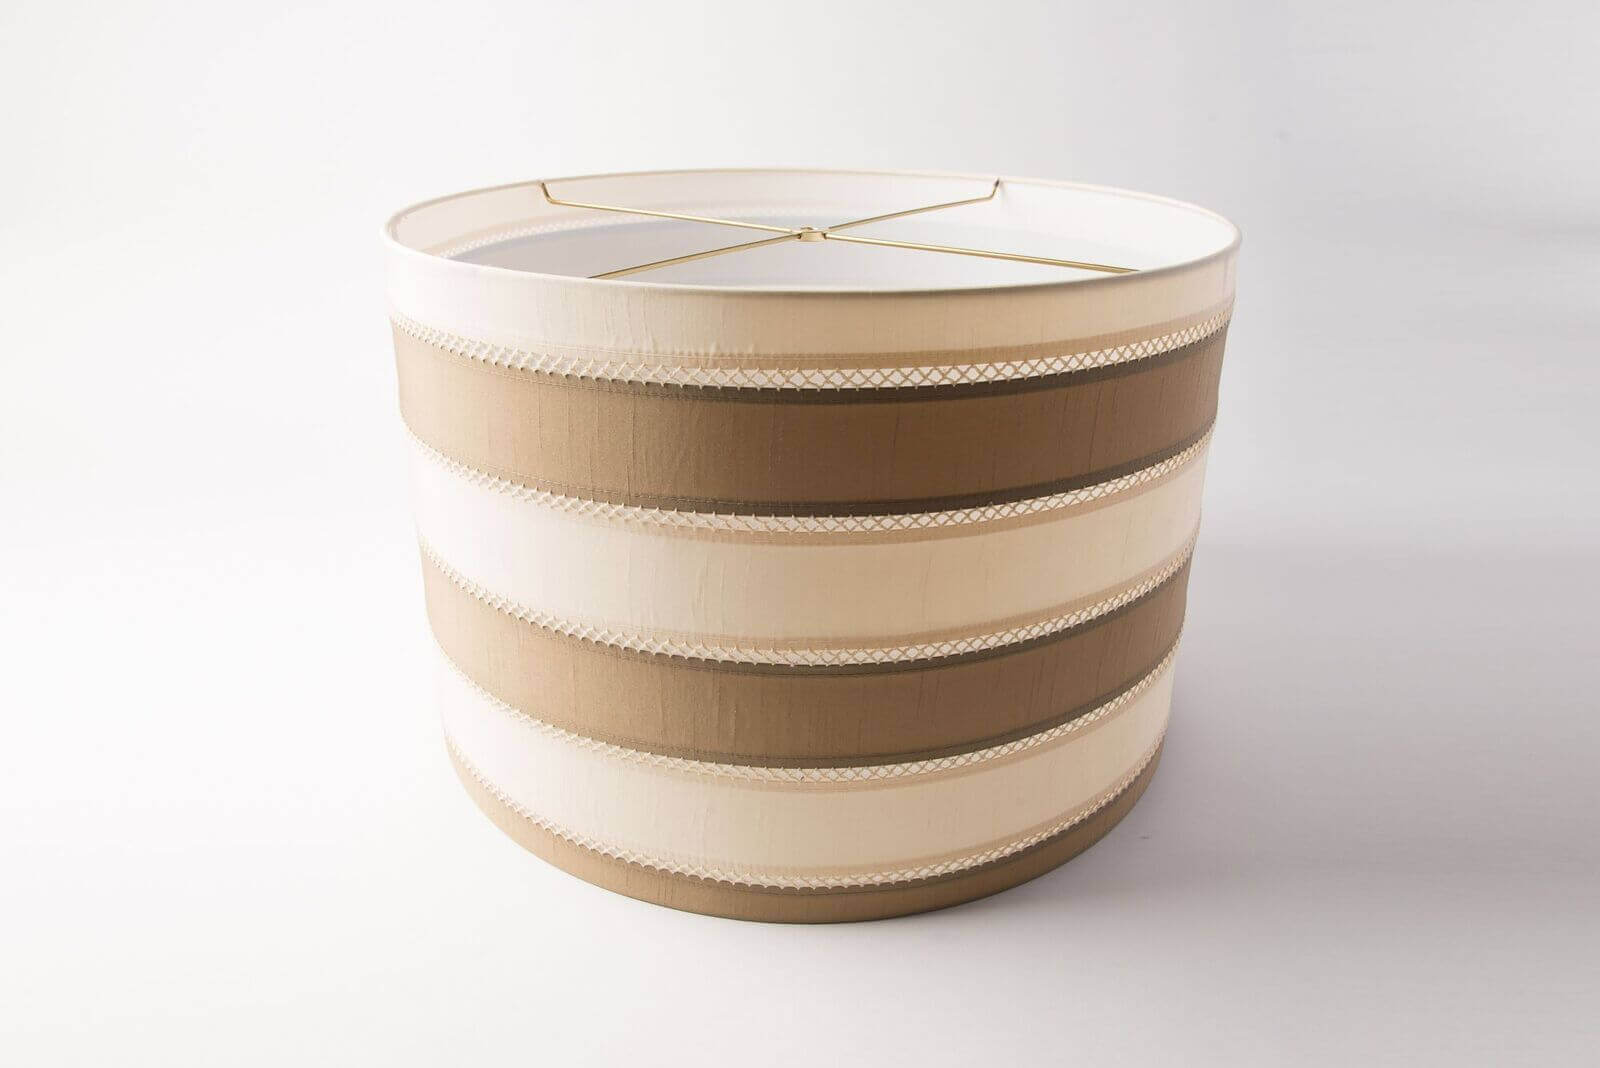 https://www.hotel-lamps.com/resources/assets/images/product_images/Drum_Short_Rolled_Edge_Beige.jpeg